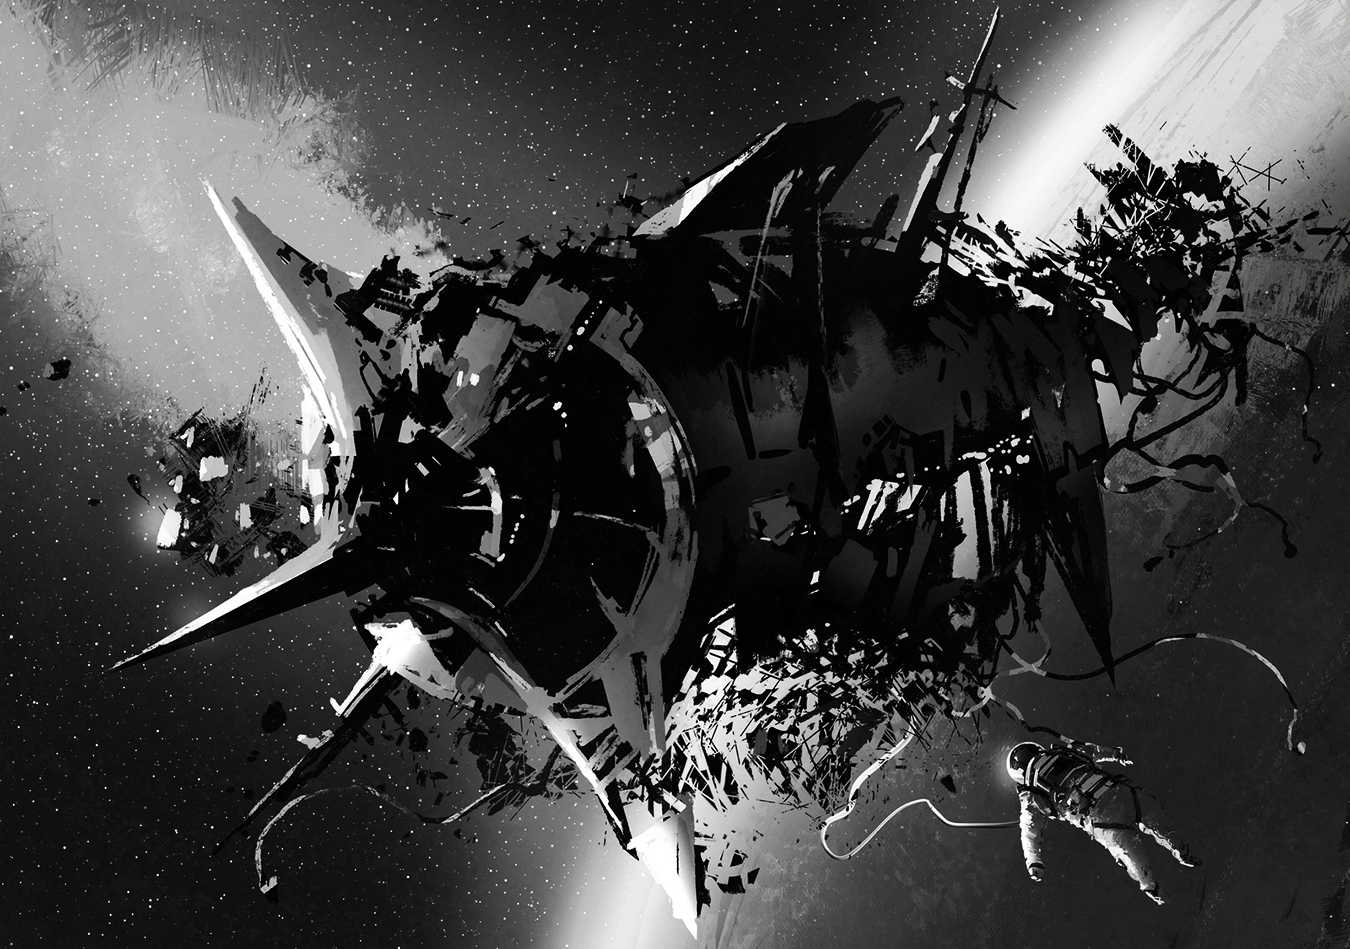 Black and white image of a wrecked spacecraft drifting in space with dead astronauts.